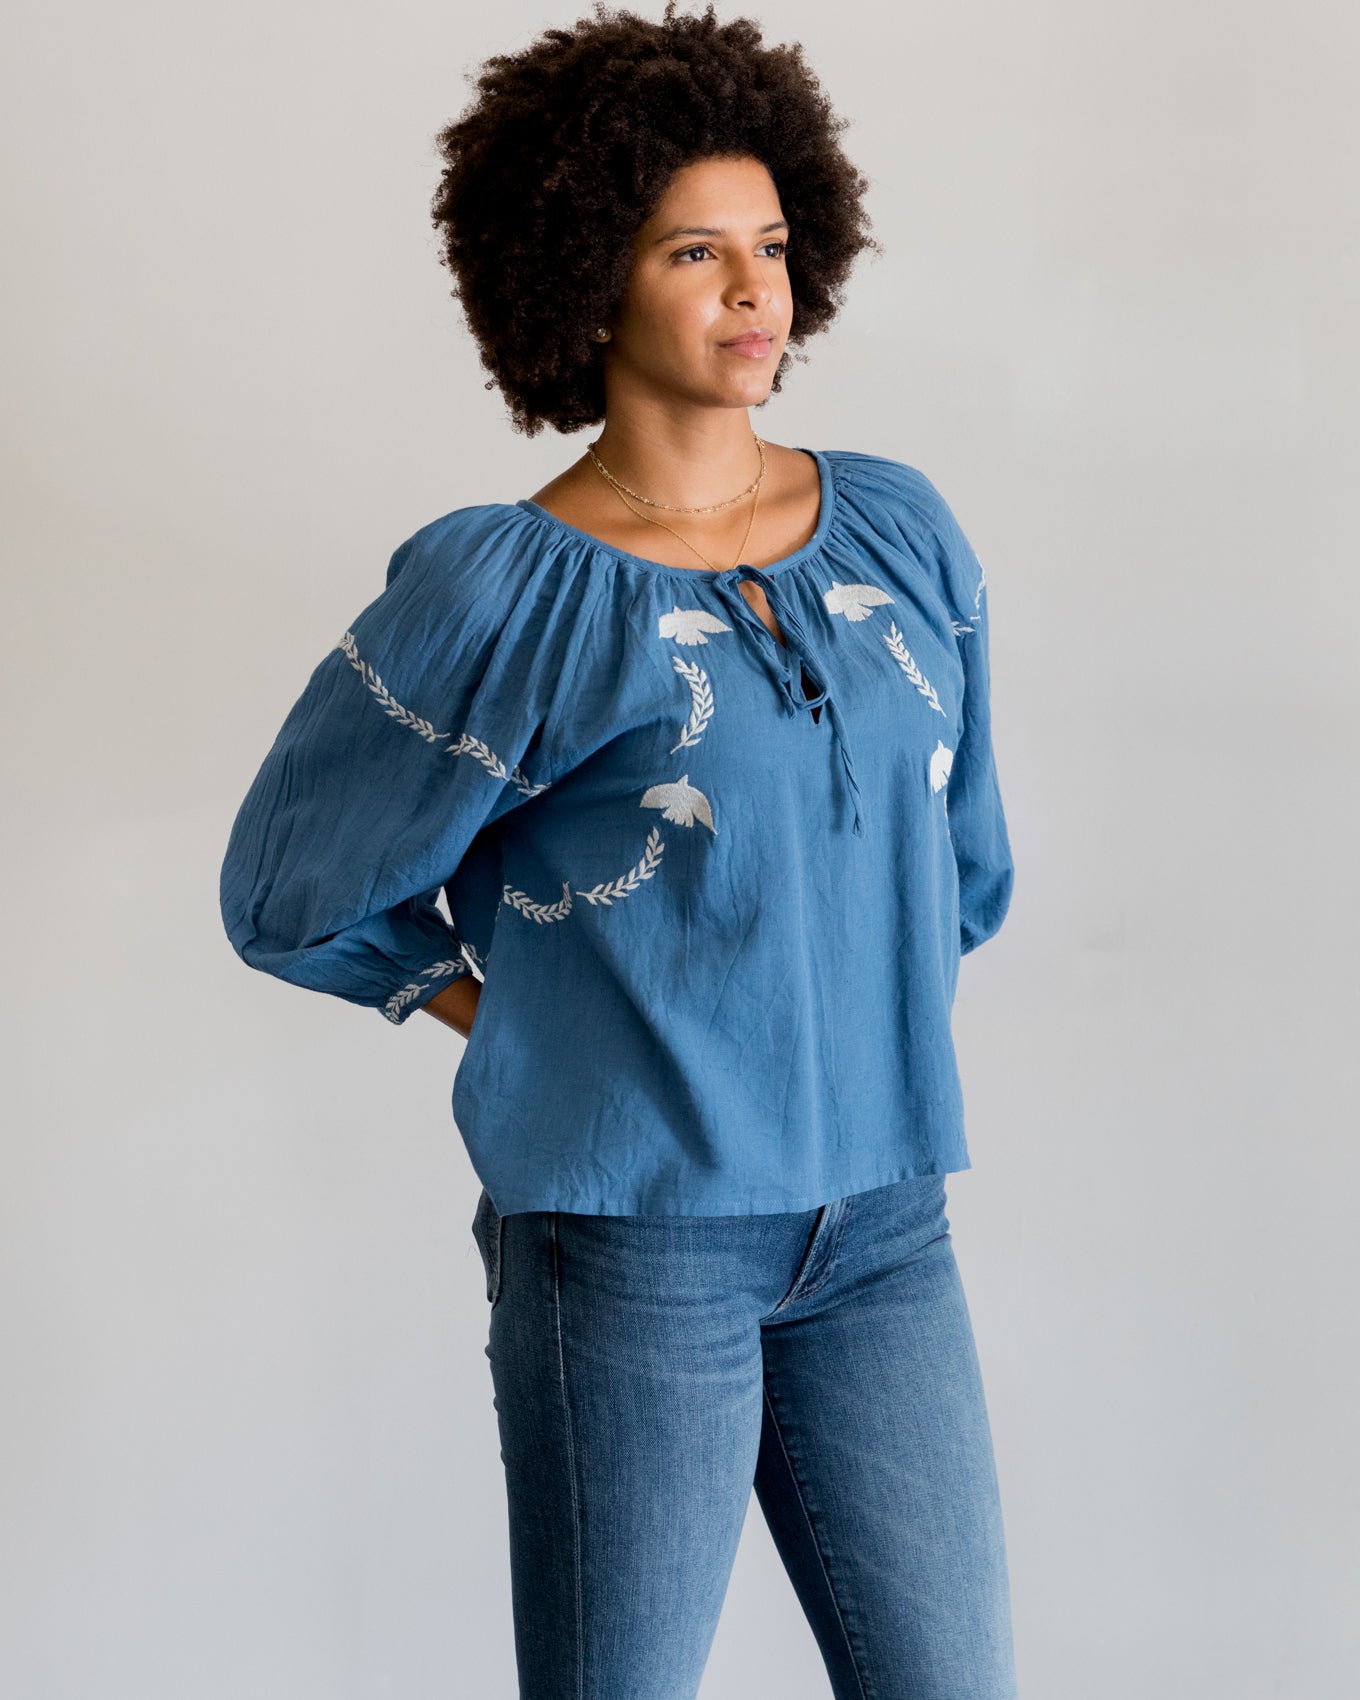 Emerson Fry Lucy Dove Embroidery Top in Riviera Flax